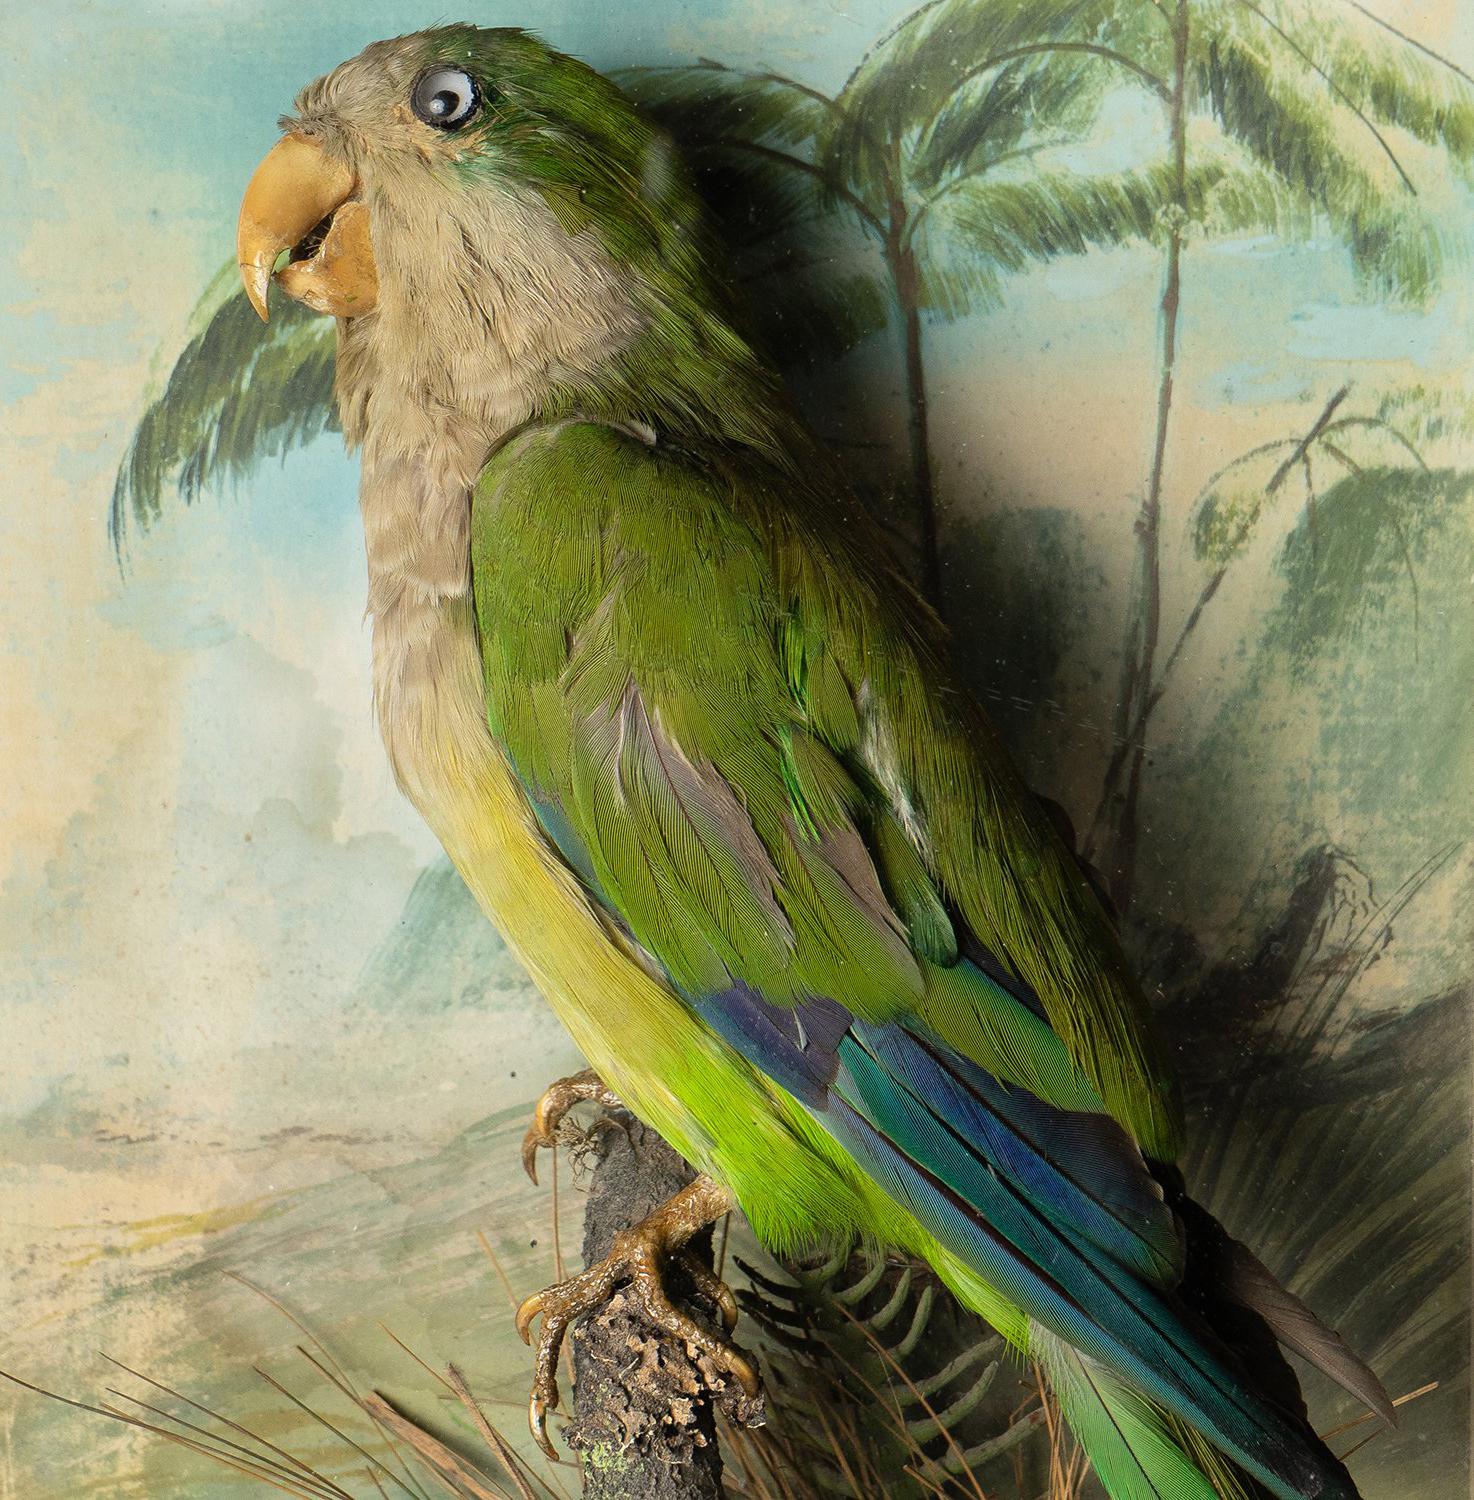 Taxidermy Study of a Quaker Parrot/Monk Parakeet (Myopsitta monachus)

A good quality study depicting an example of the famously bright green parrot against an original hand-painted tropical backdrop in a wall mountable glass case.
Signed verso in